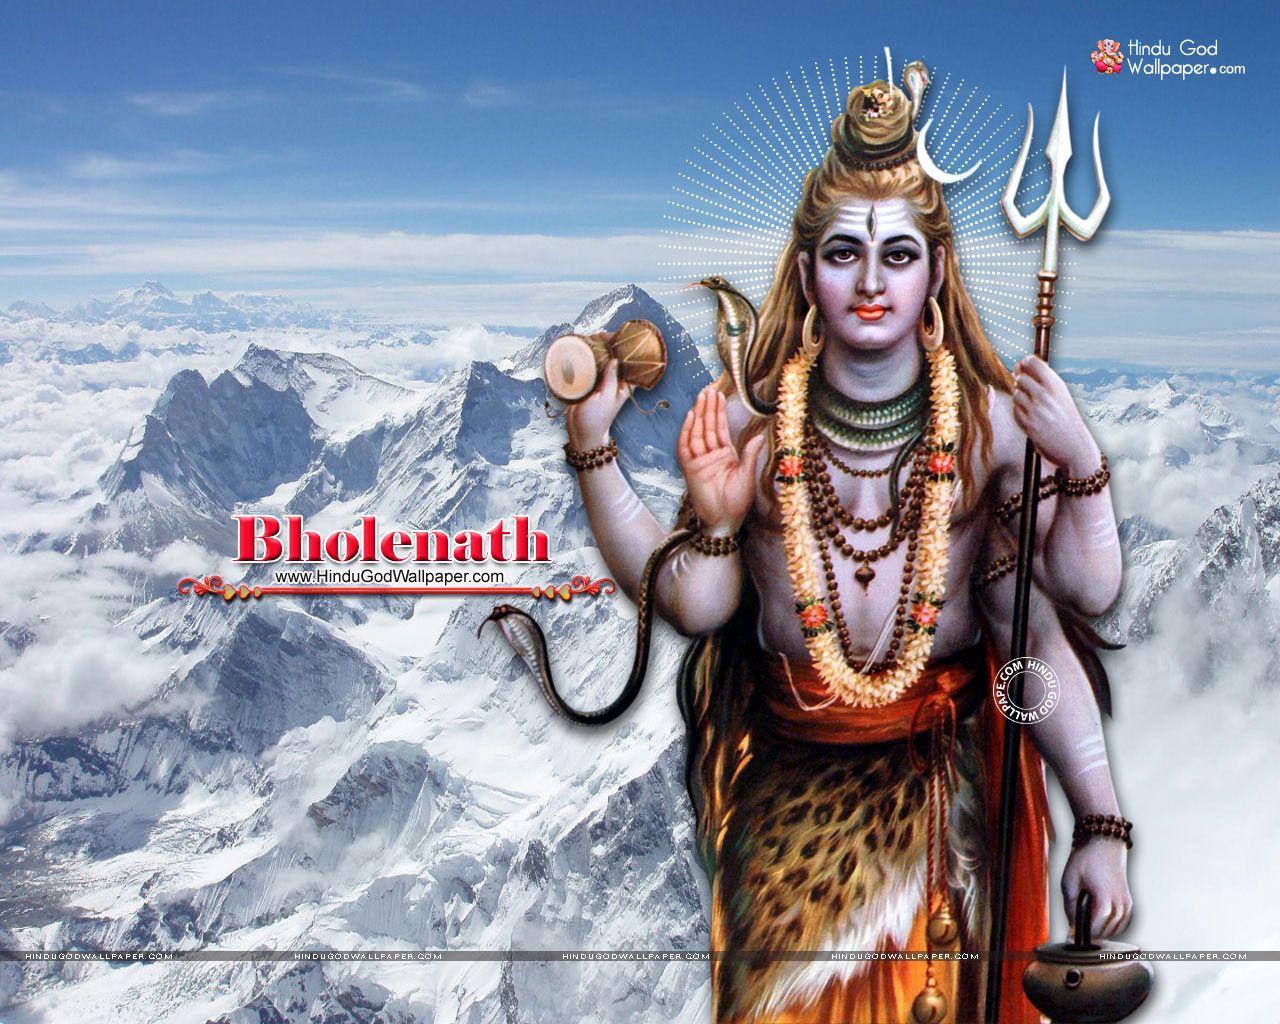 Bholenath HD Wallpapers, Image, Photos Free Download